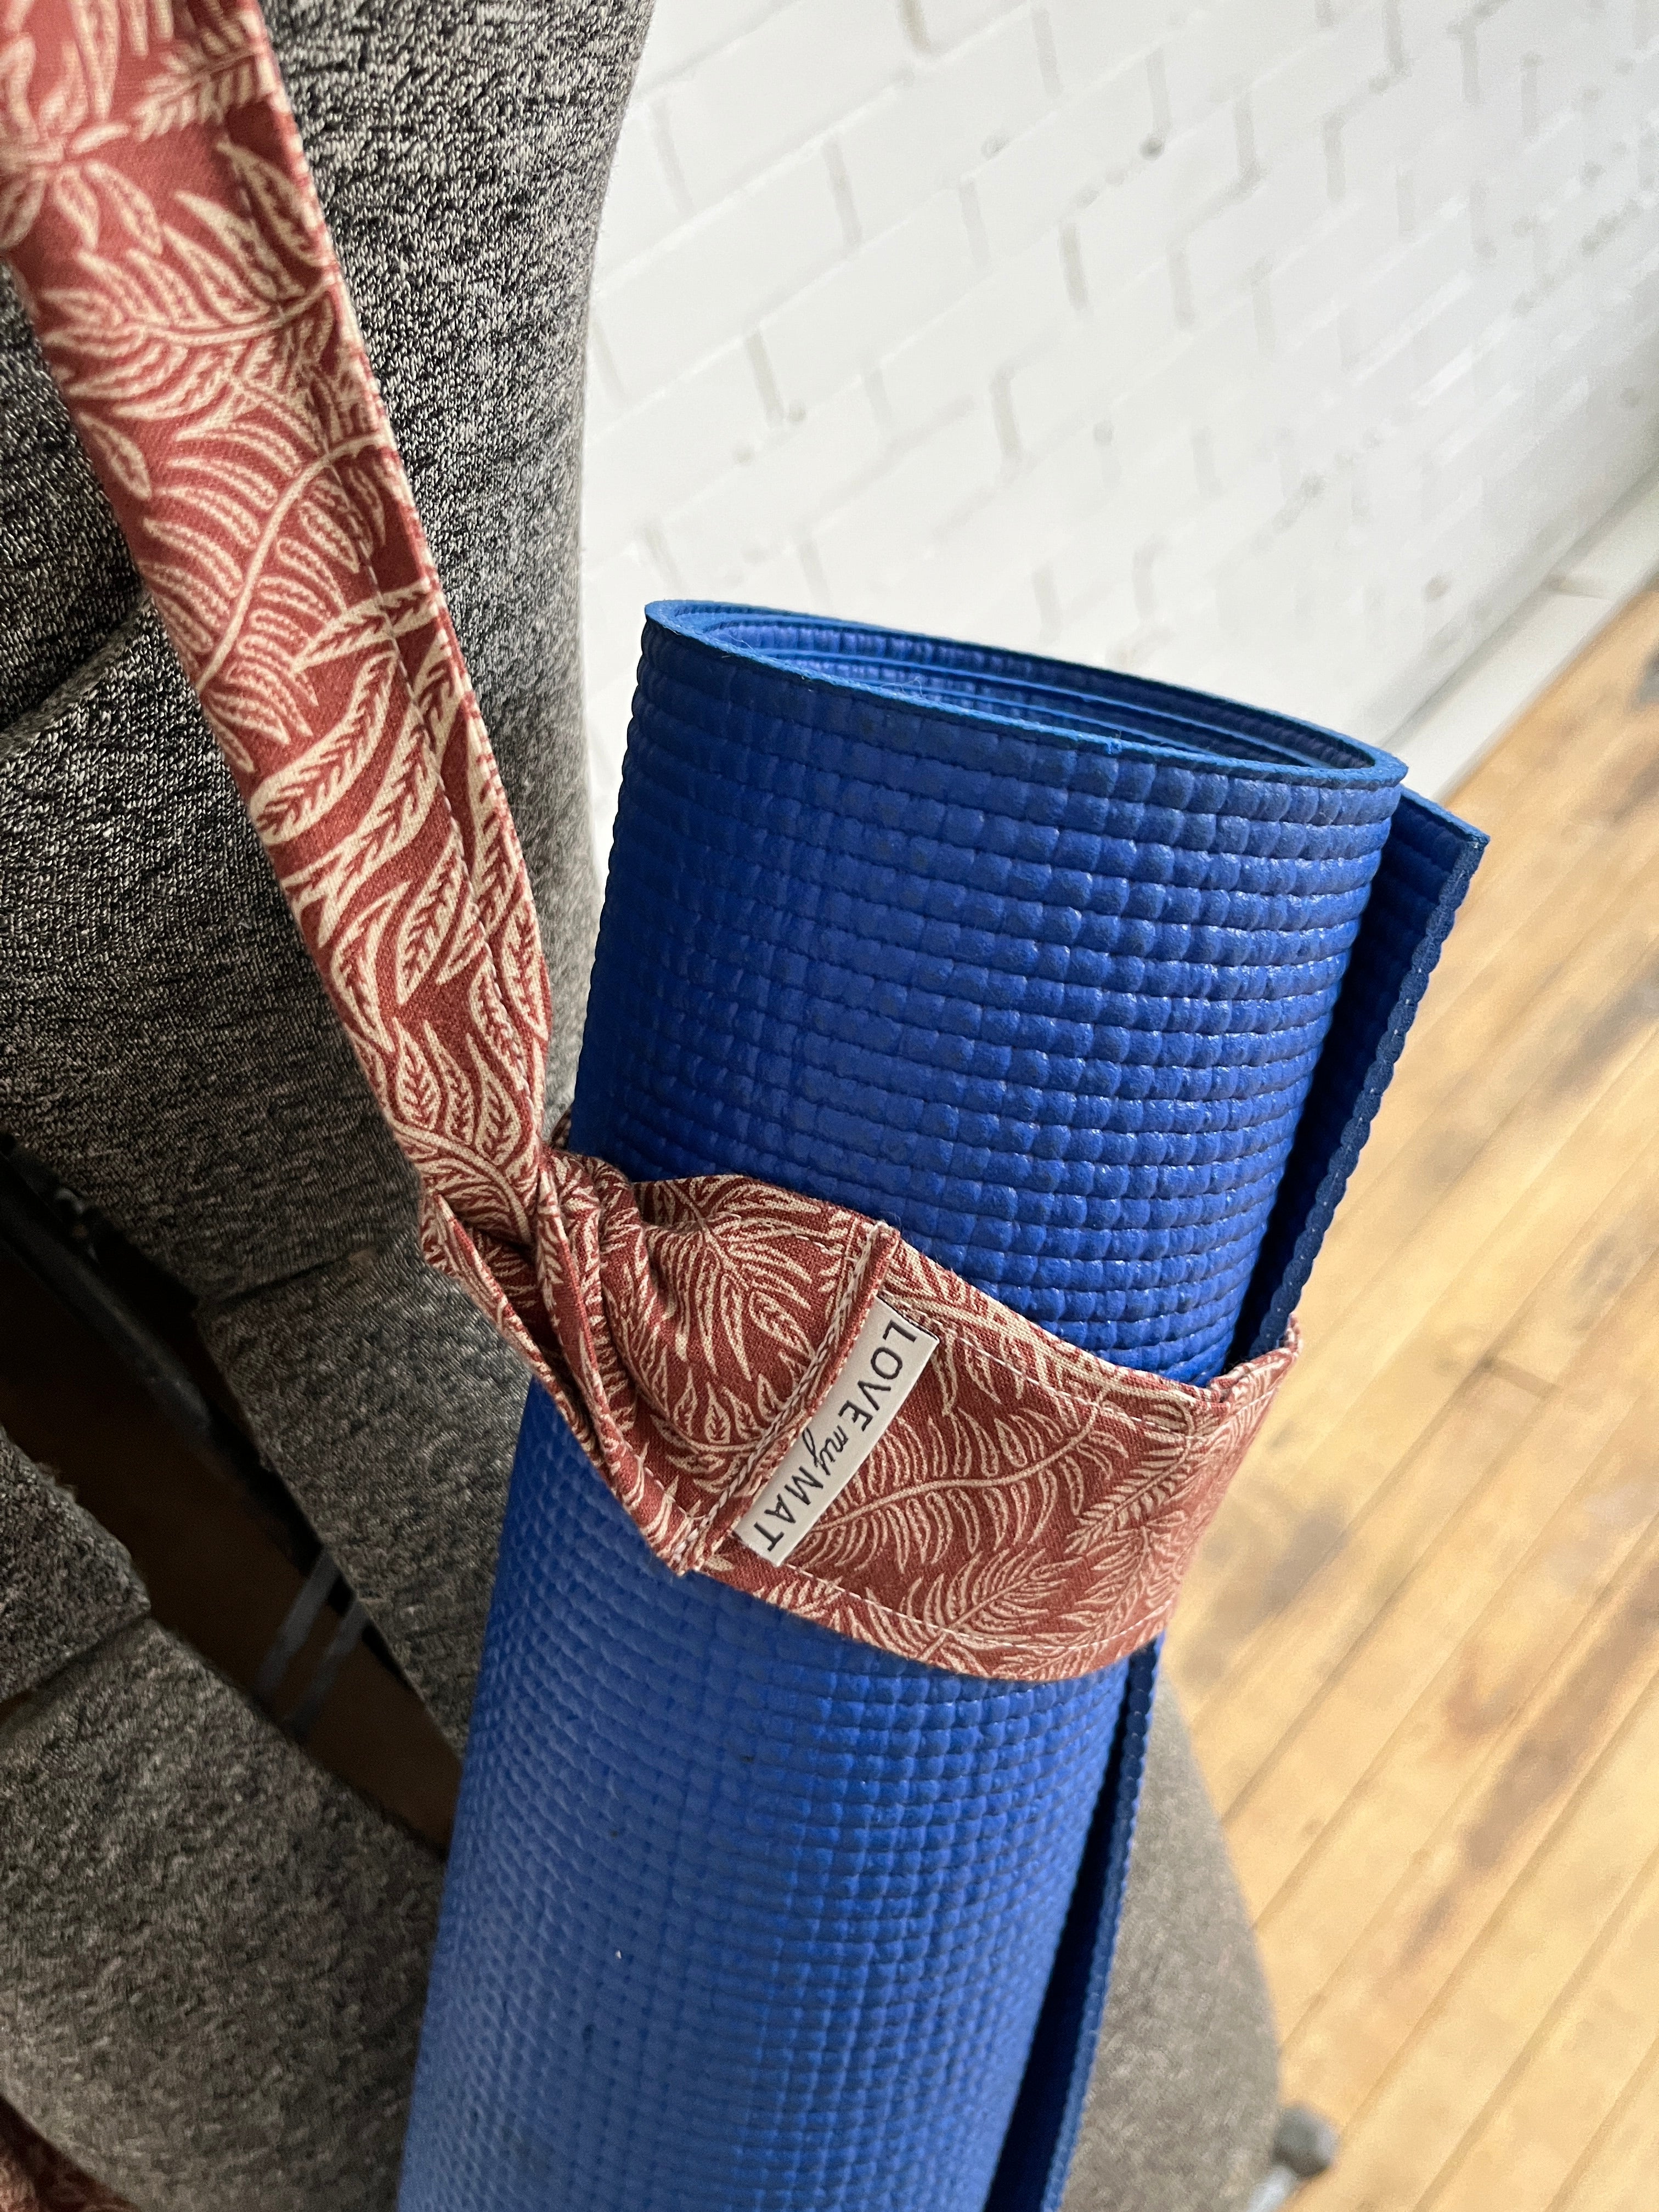 Eco-Friendly Yoga Mat Straps Made in Canada – Love My Mat